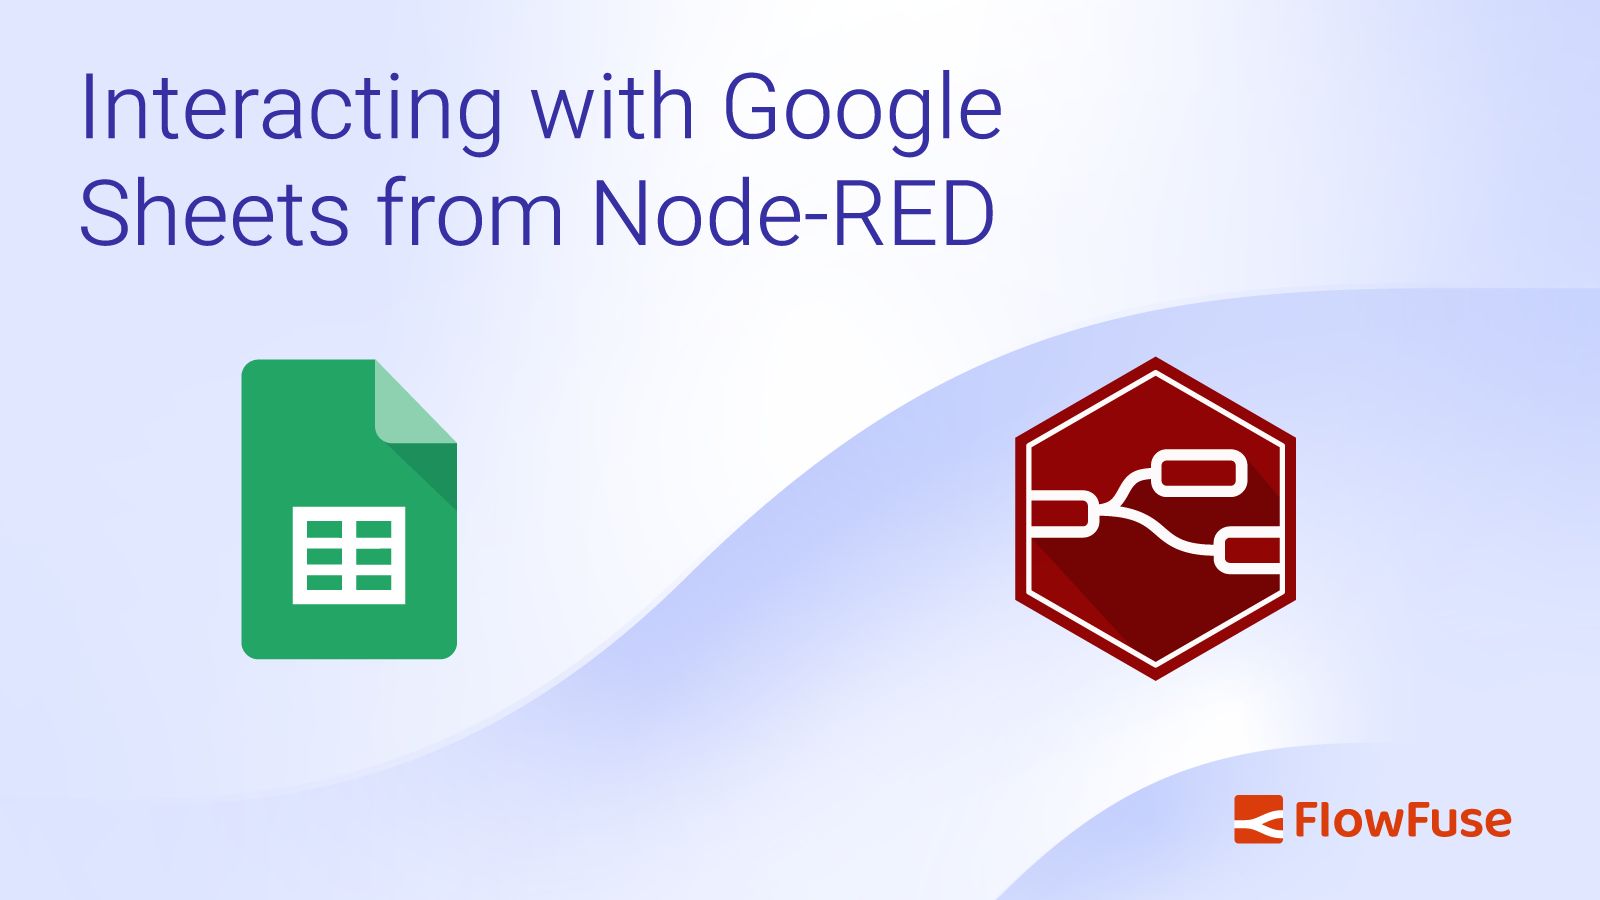 Image representing Interacting with Google Sheets from Node-RED